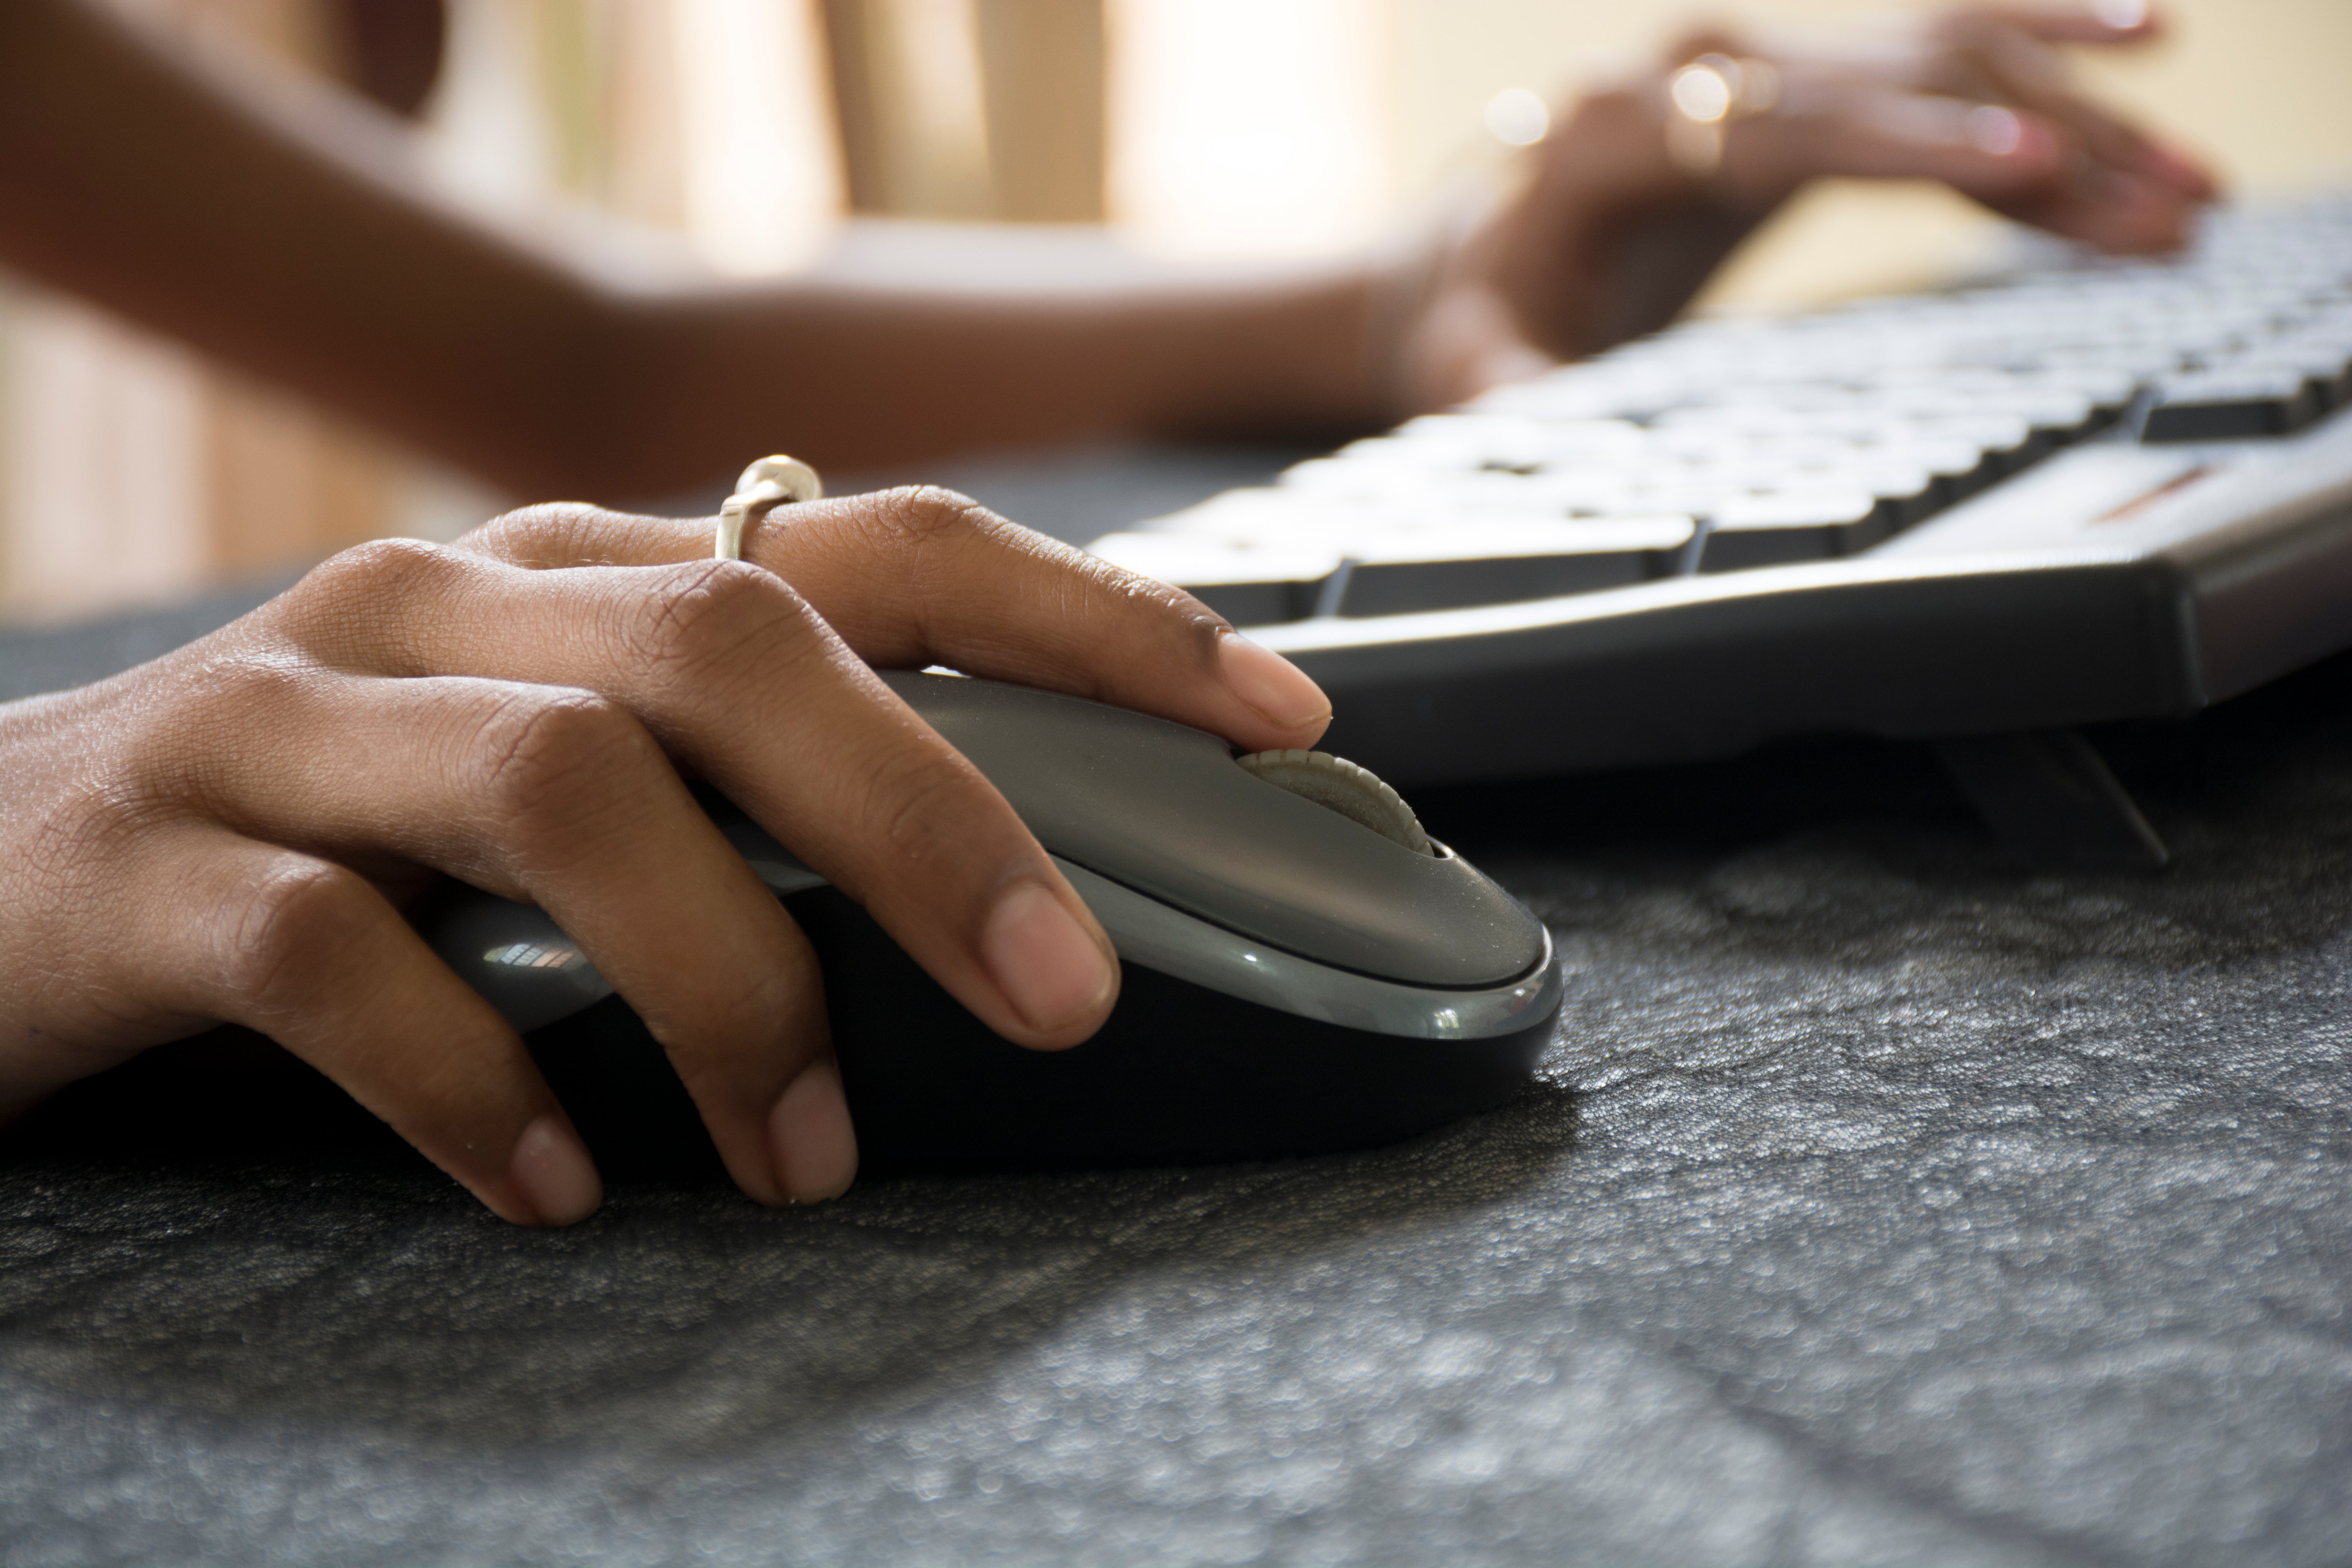 Closeup of a woman's hand on a computer mouse